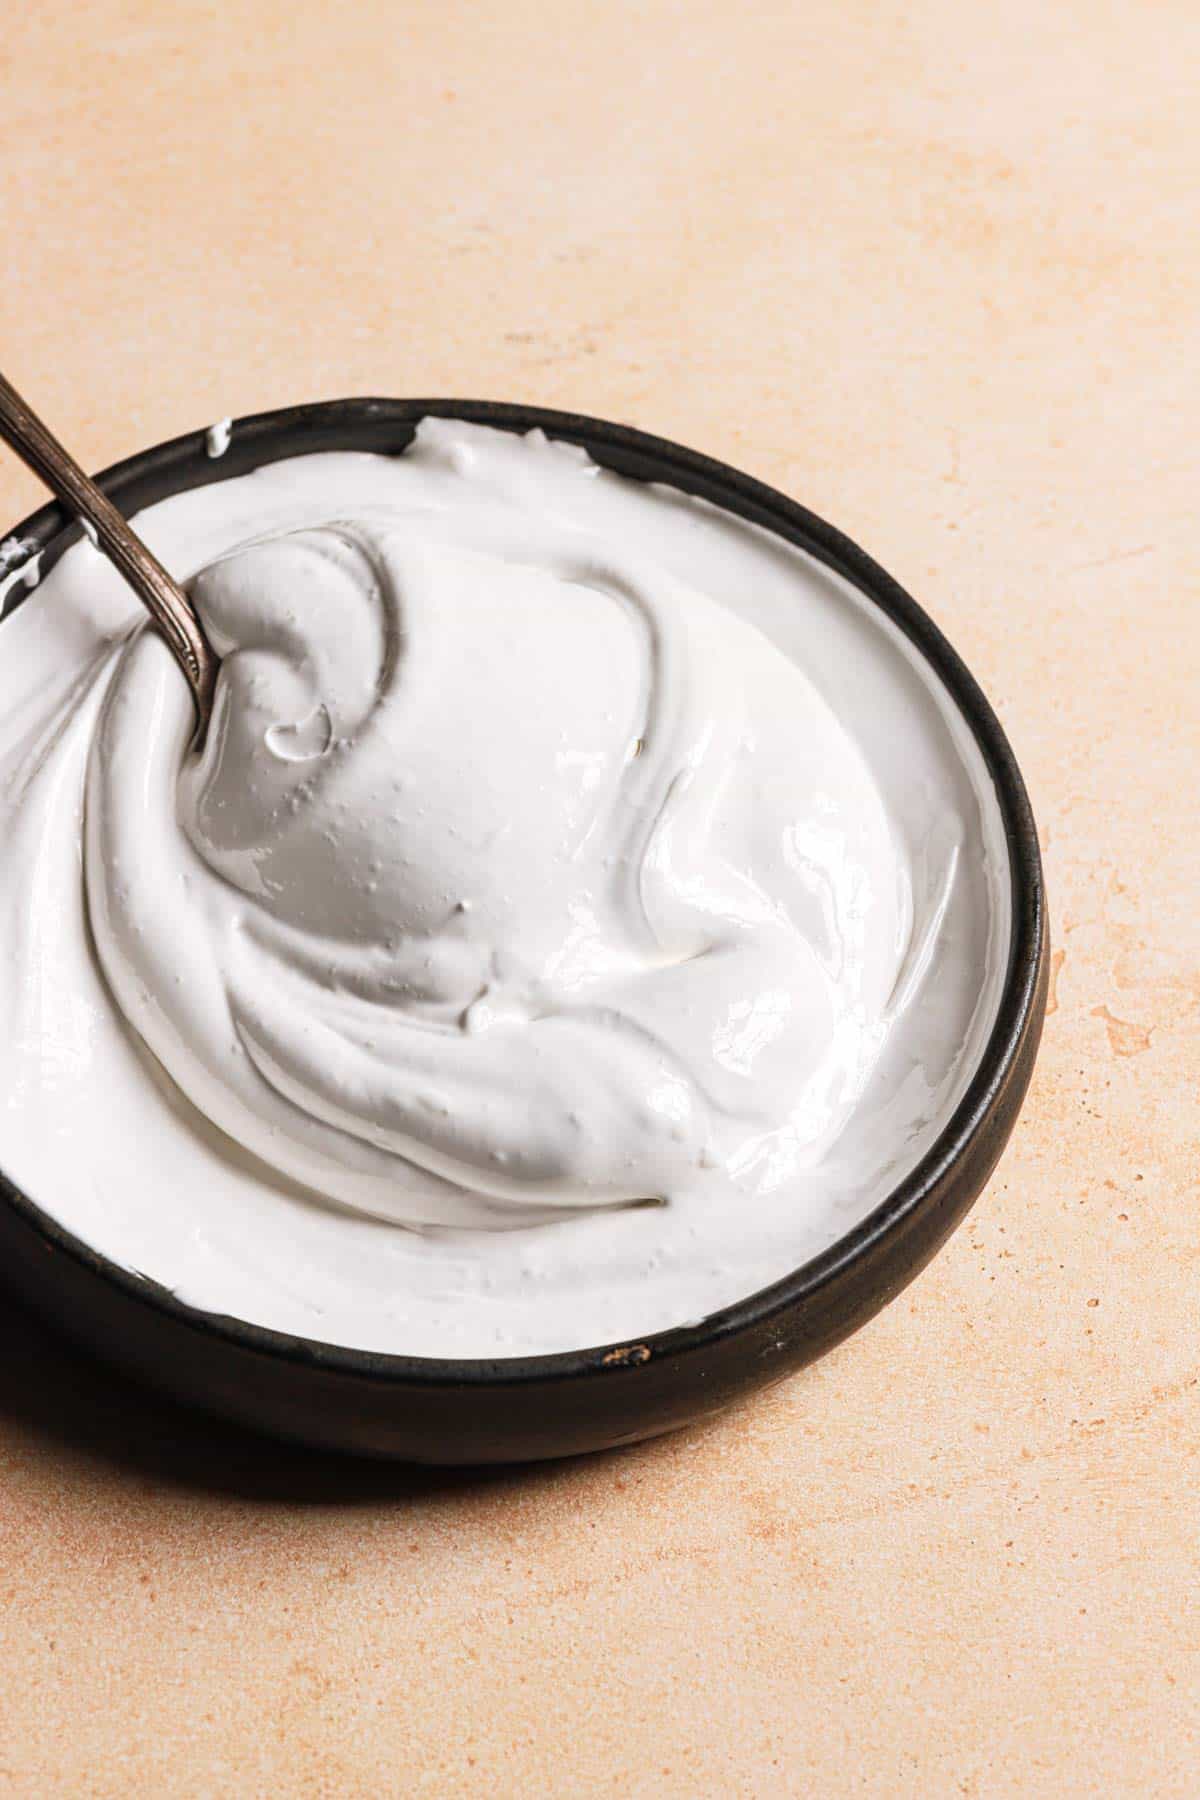 A black bowl filled with marshmallow creme and a silver spoon in the bowl on the left side.